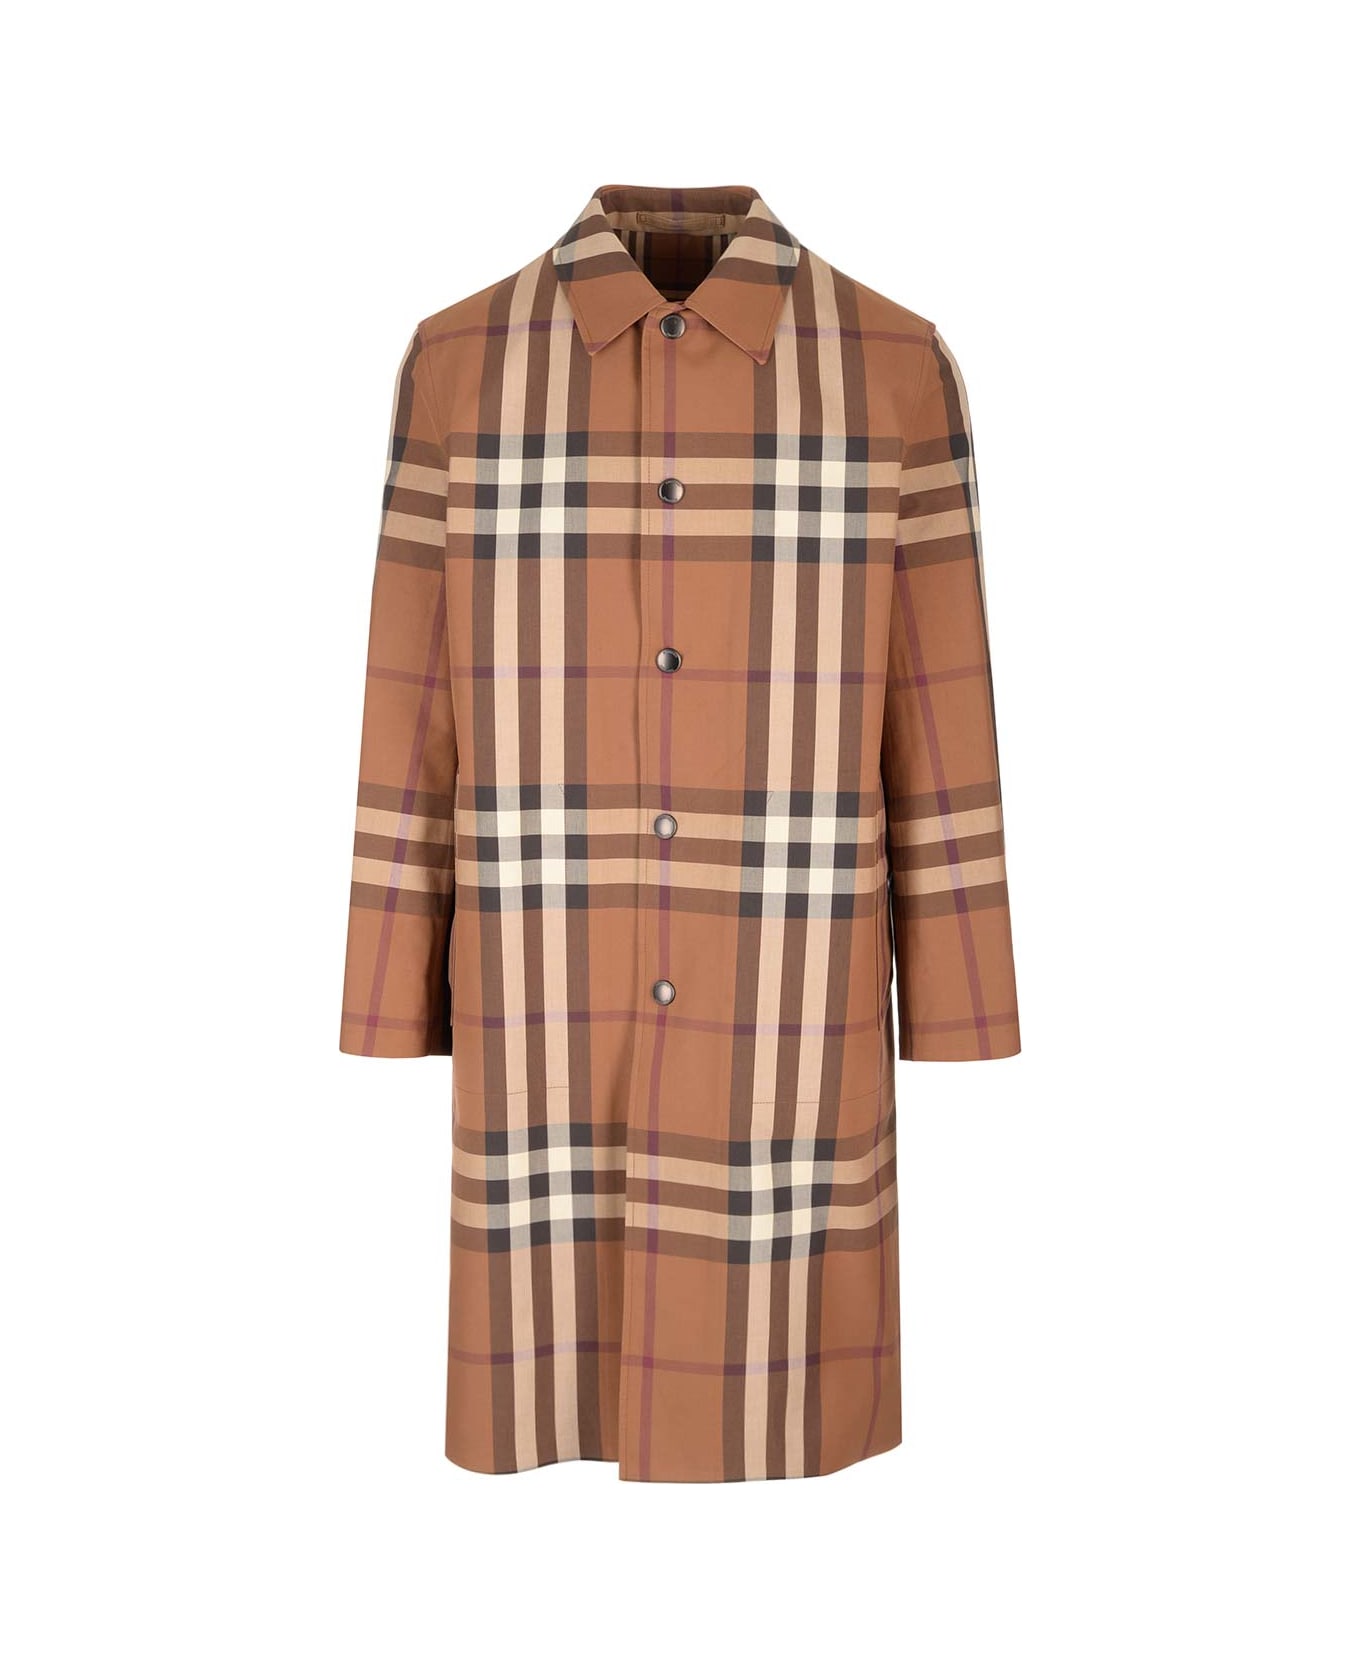 Burberry Reversible Trench Coat With Check Motif - Brown